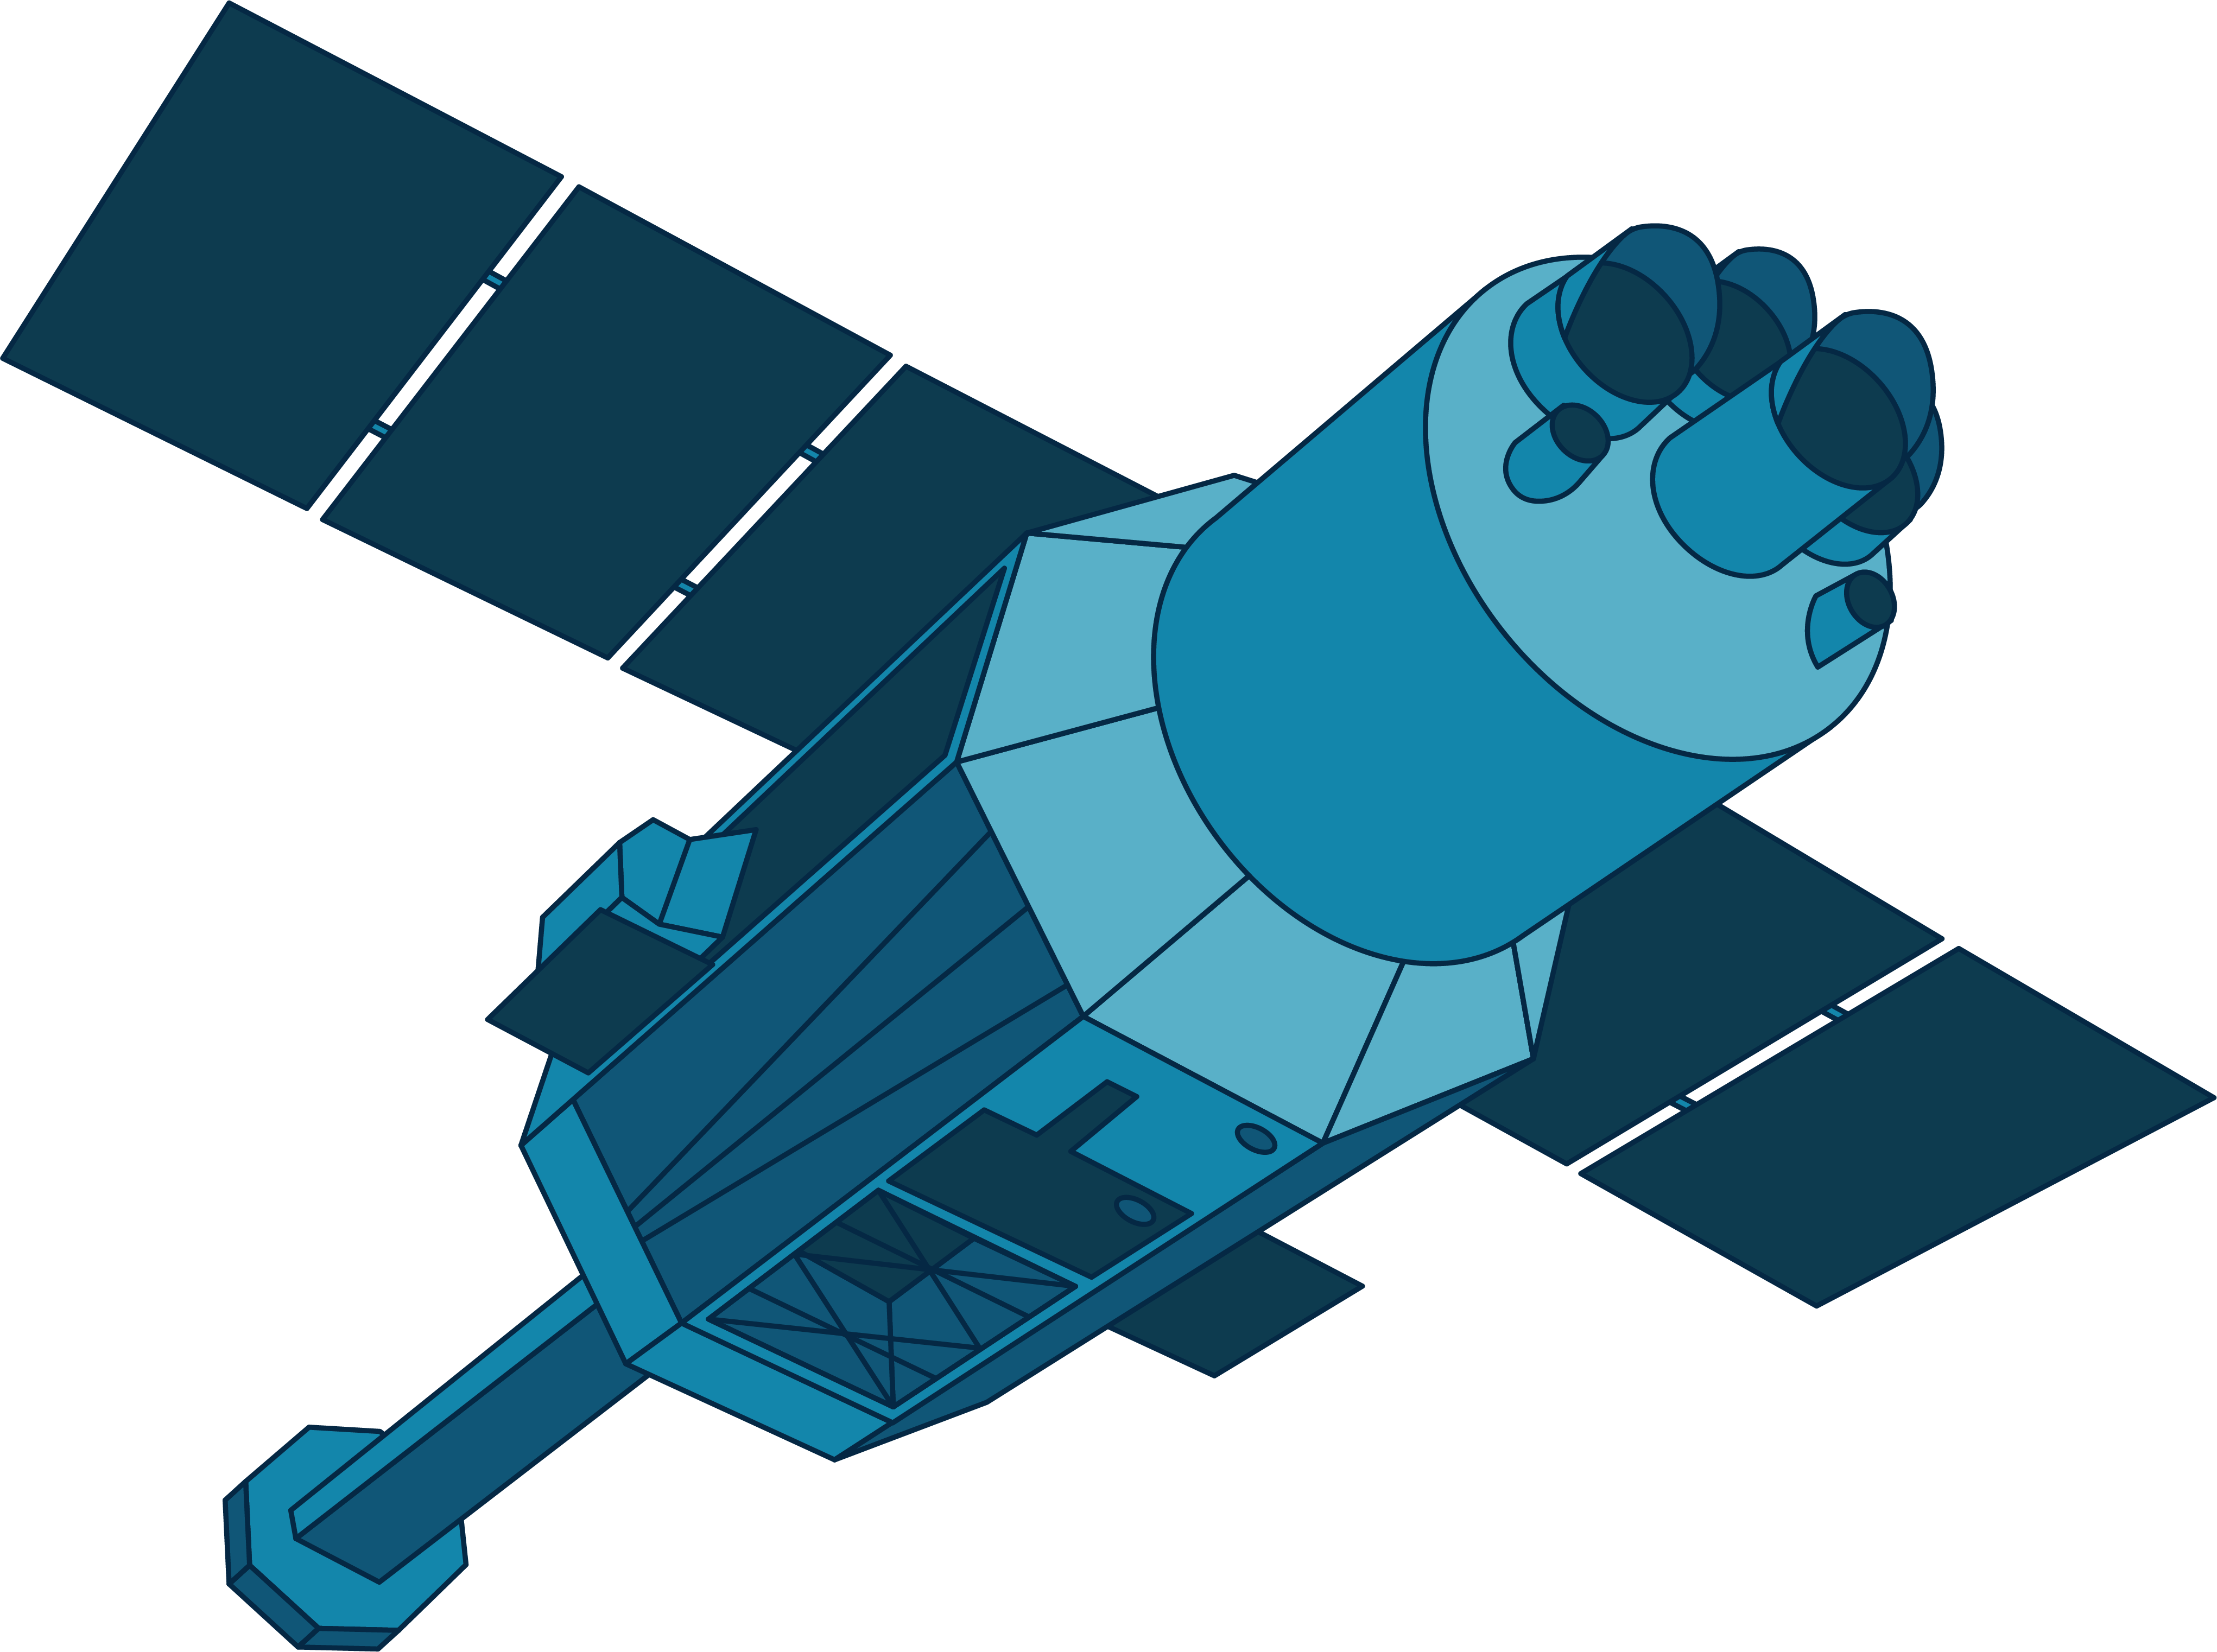 This Hitomi illustration shows the space telescope in shades of blue. The main body of the spacecraft is a long octagon with a cylindrical object on the front end. The cylinder has several smaller cylinders extending from it. On the back end of the satellite extends a long pole that ends in an octagonal panel. Solar panels extend to either side of the main body.  